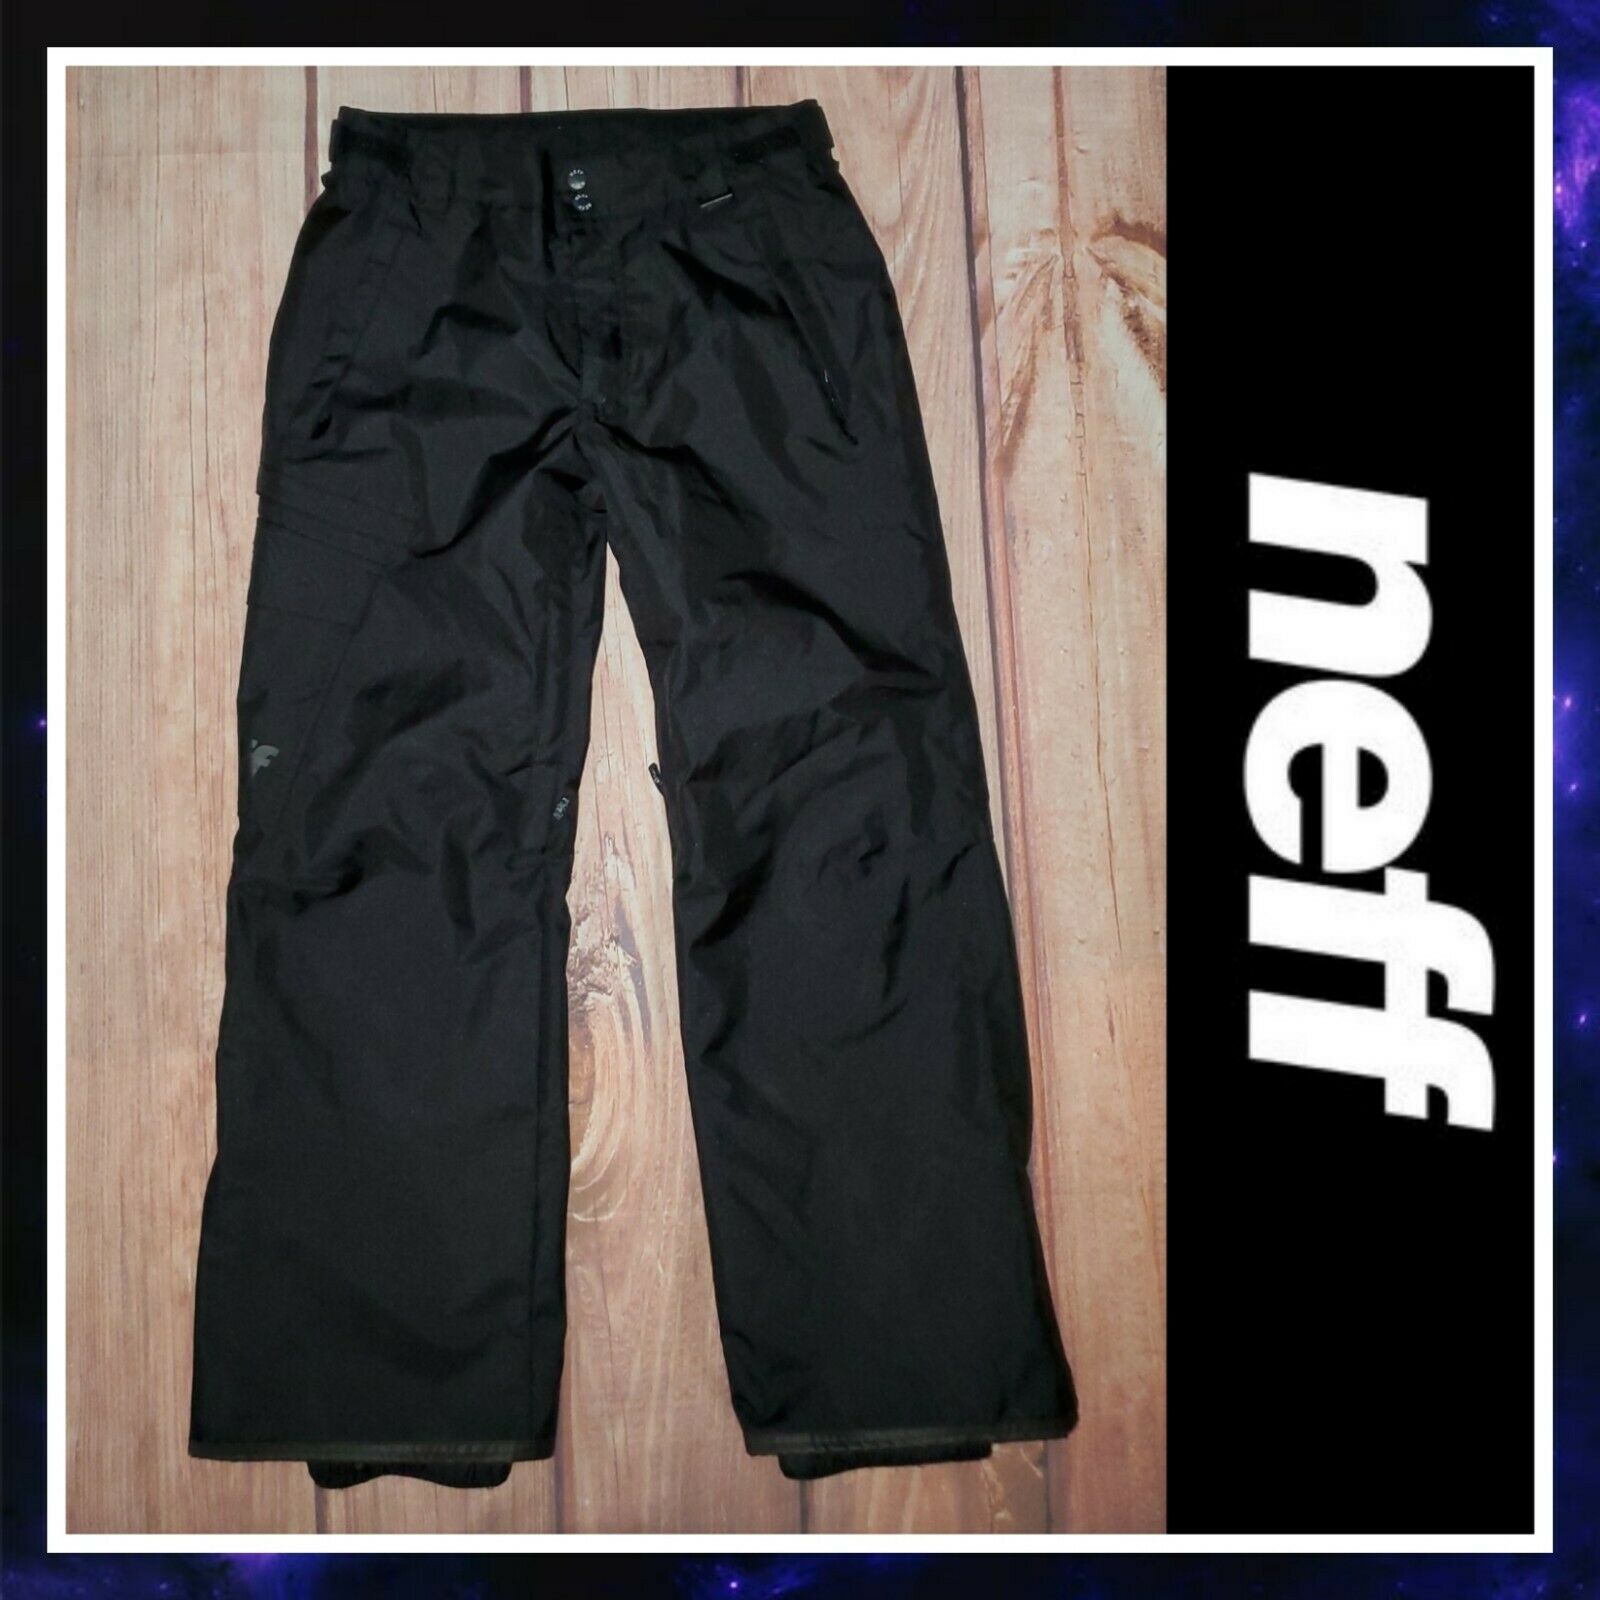 Neff Youth Large 14/16 Black Snowboarding Insulated Winter Pants, Cargo Pockets